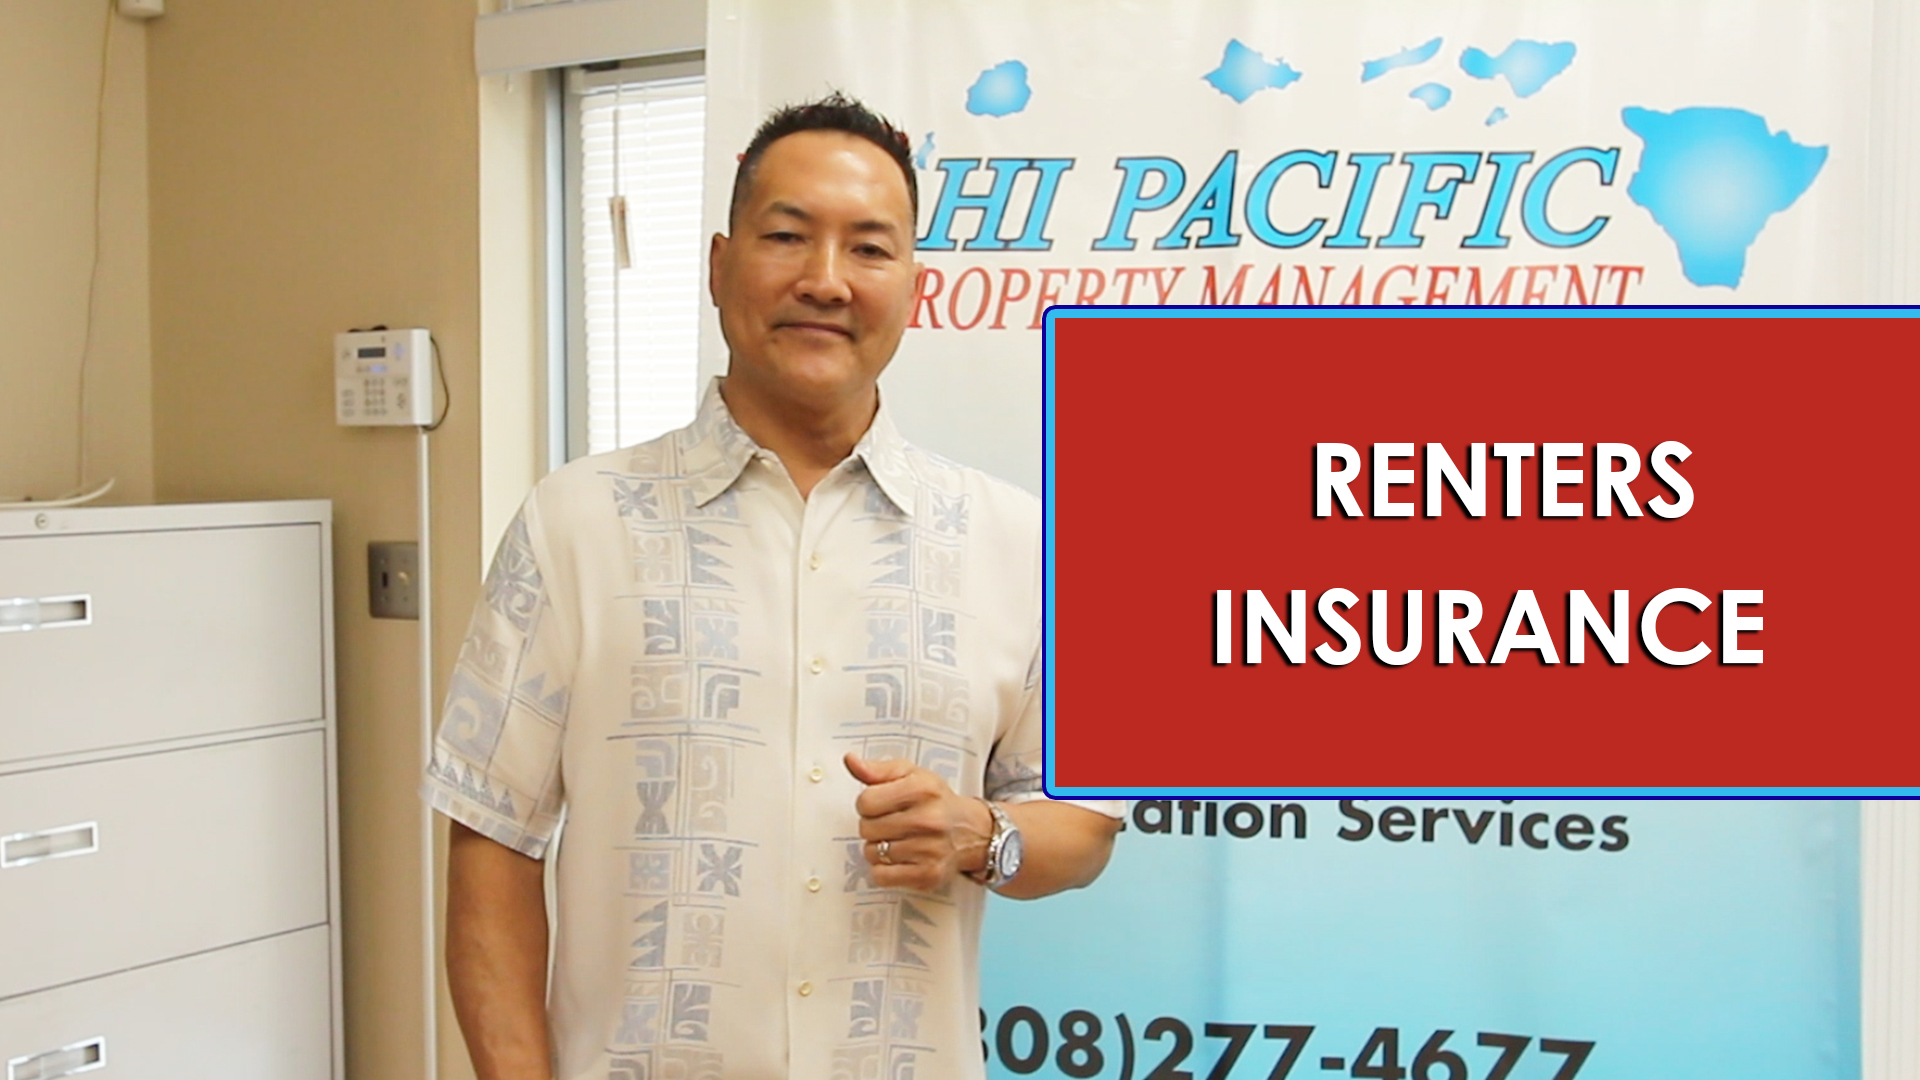 Why Renters Insurance Benefits Tenants and Property Owners